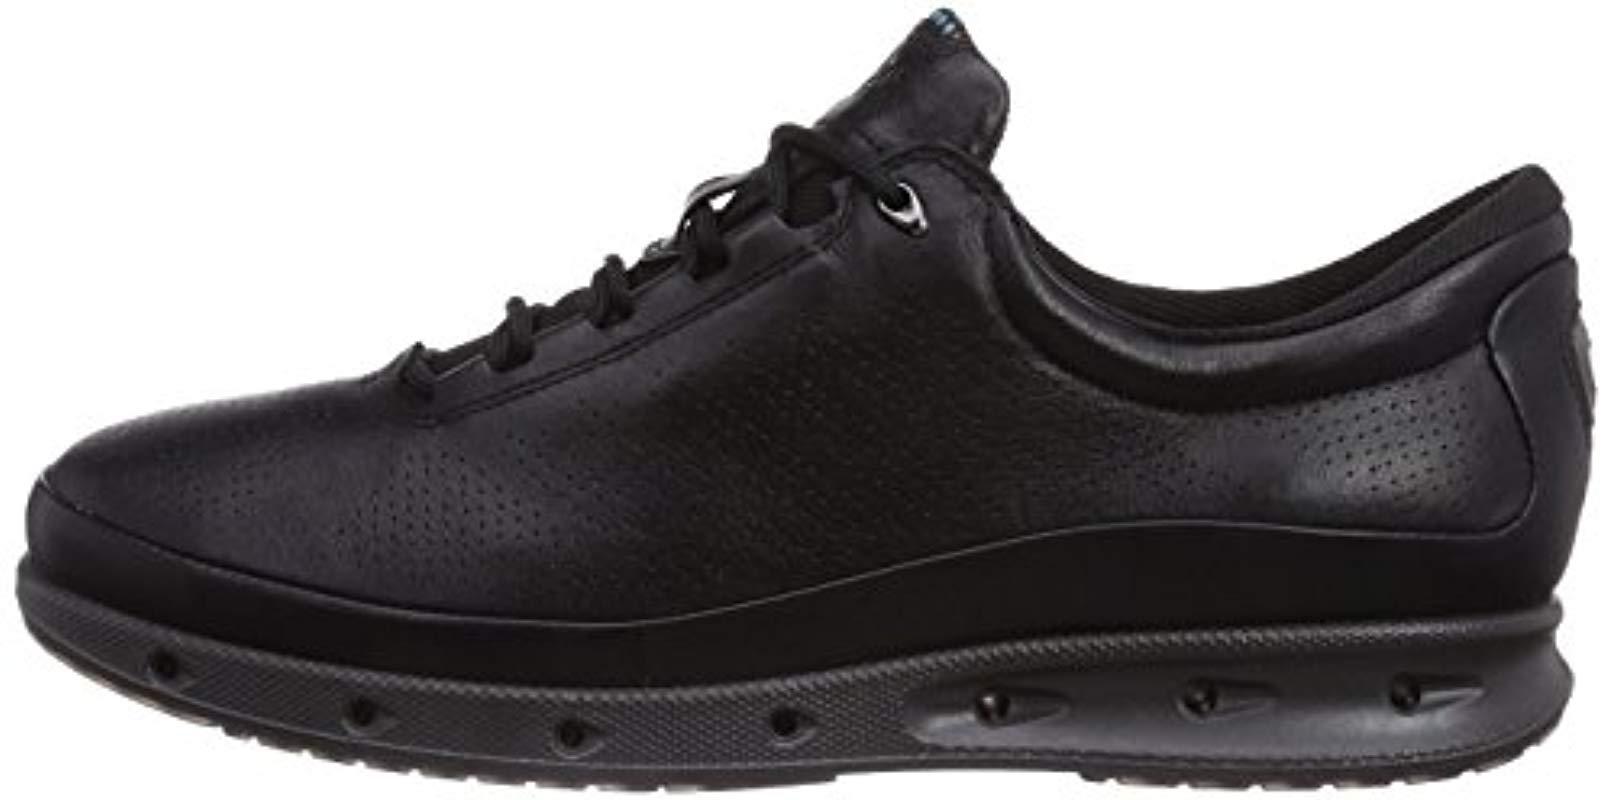 Ecco O2 Sport Shoes in Black for Men - Lyst